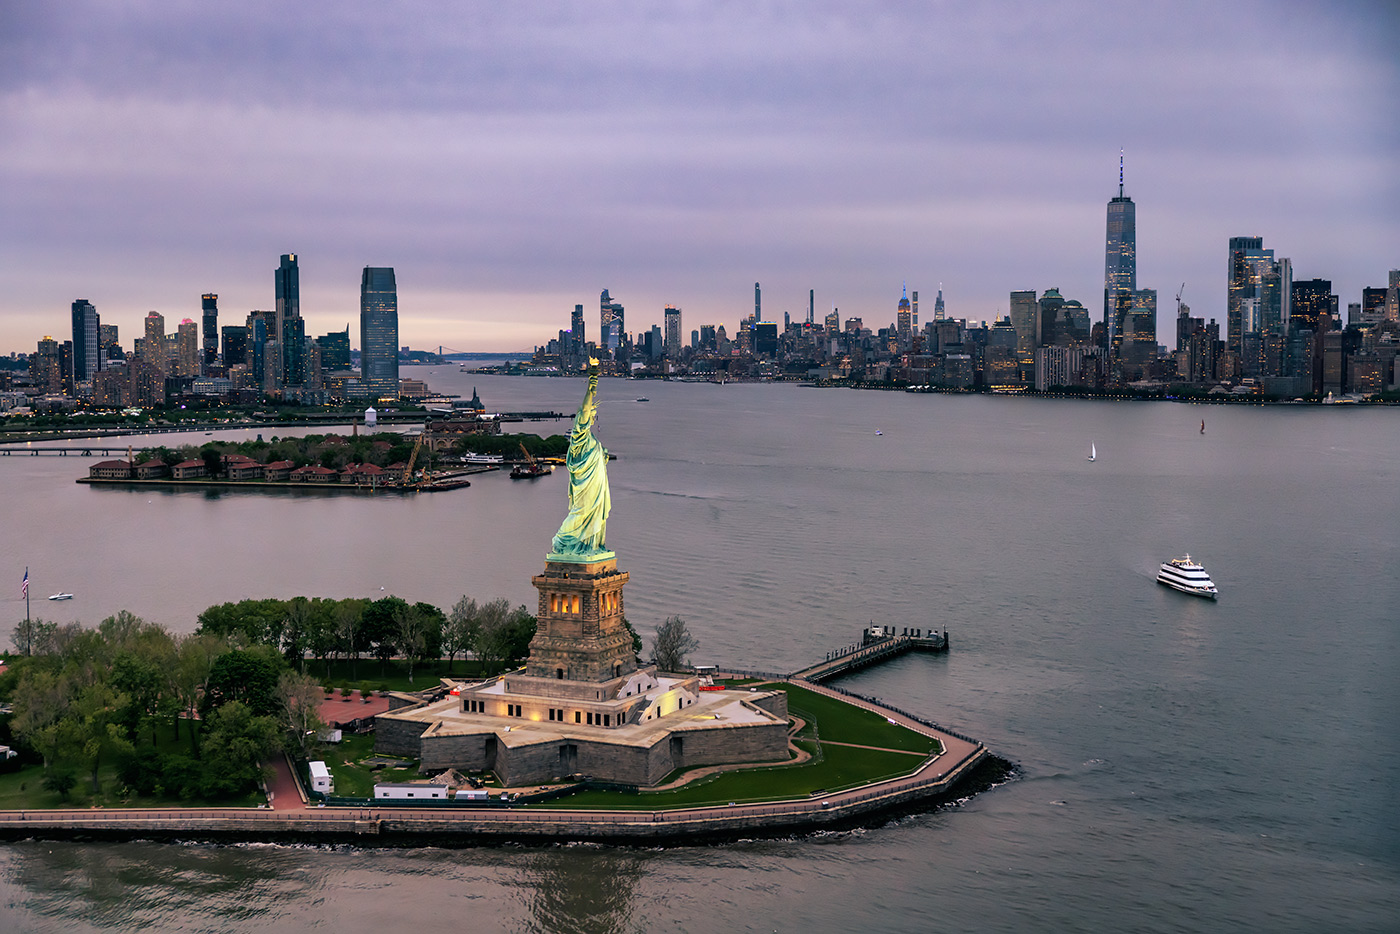 The Statue of Liberty at dusk